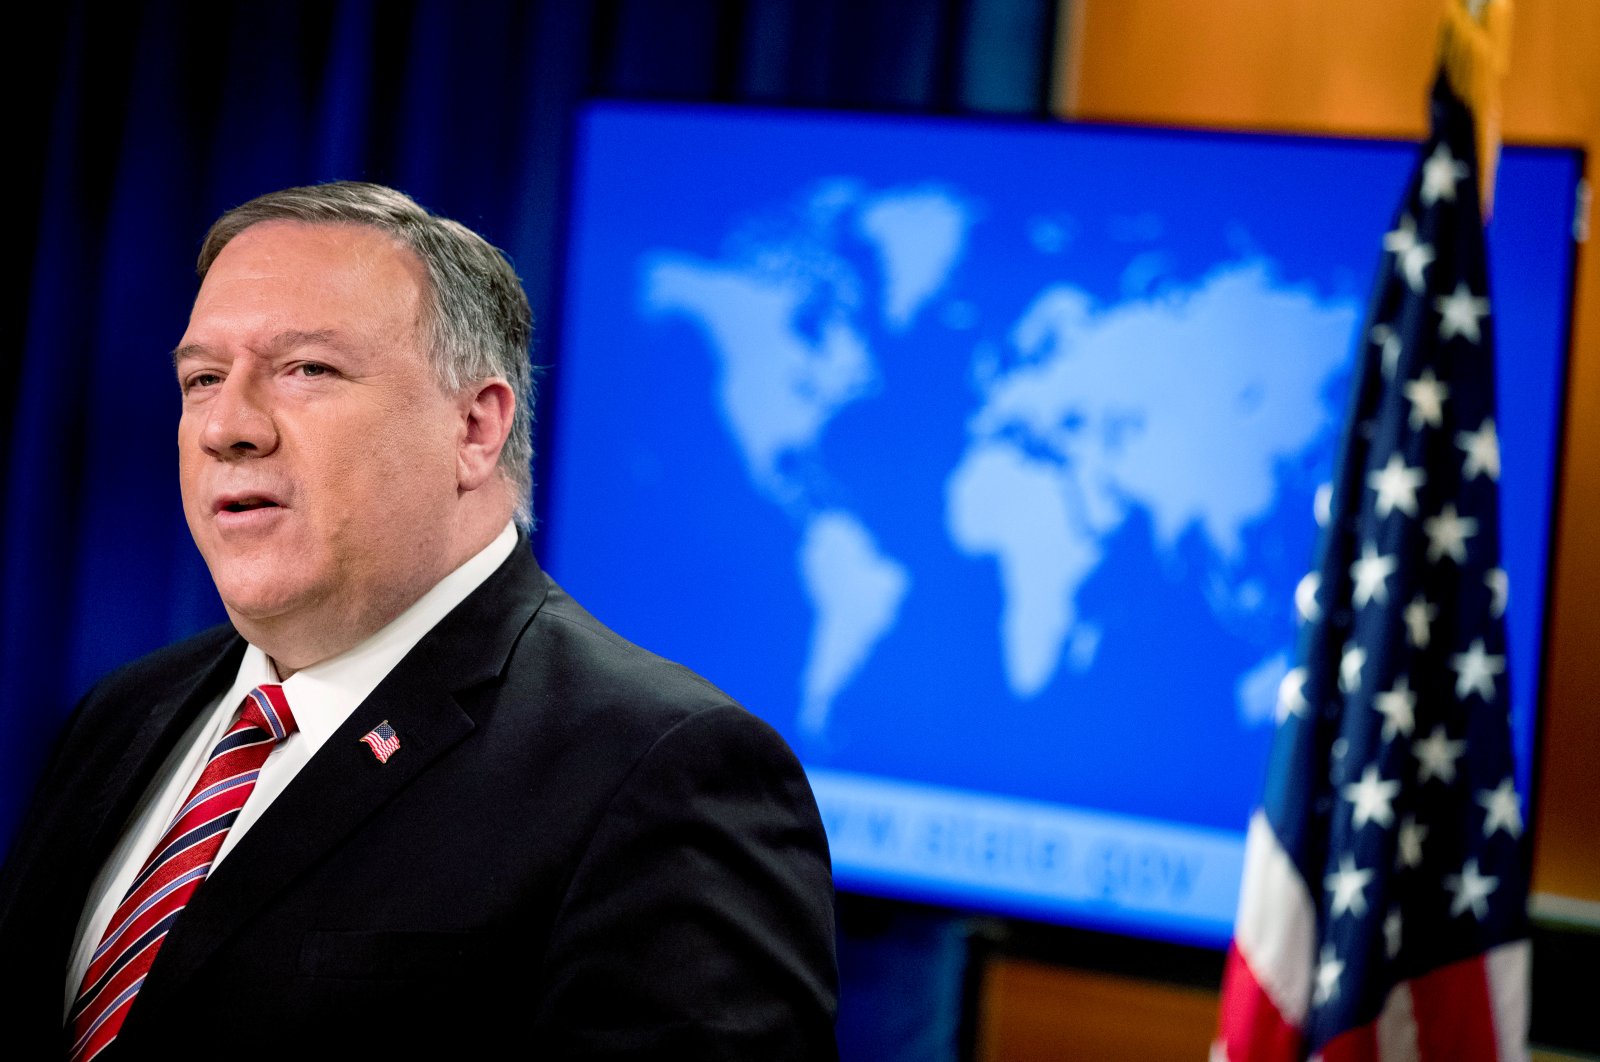 U.S. Secretary of State Mike Pompeo speaks at a news conference at the State Department, in Washington, D.C., U.S., April 29, 2020. (Reuters Photo)